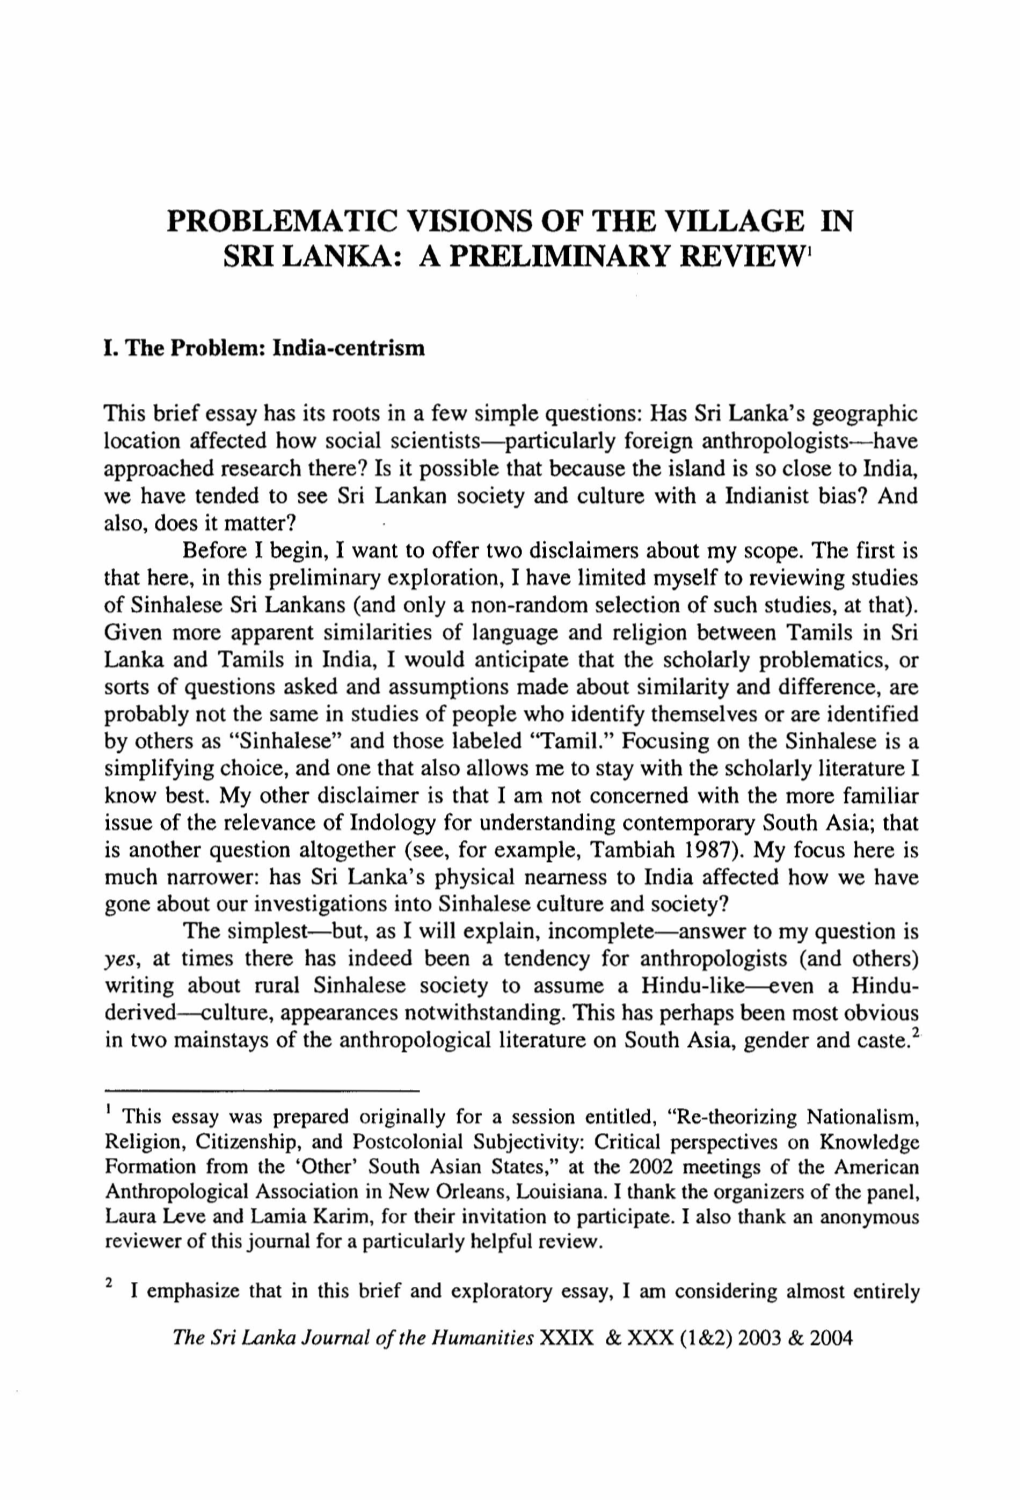 Problematic Visions of the Village in Sri Lanka: A